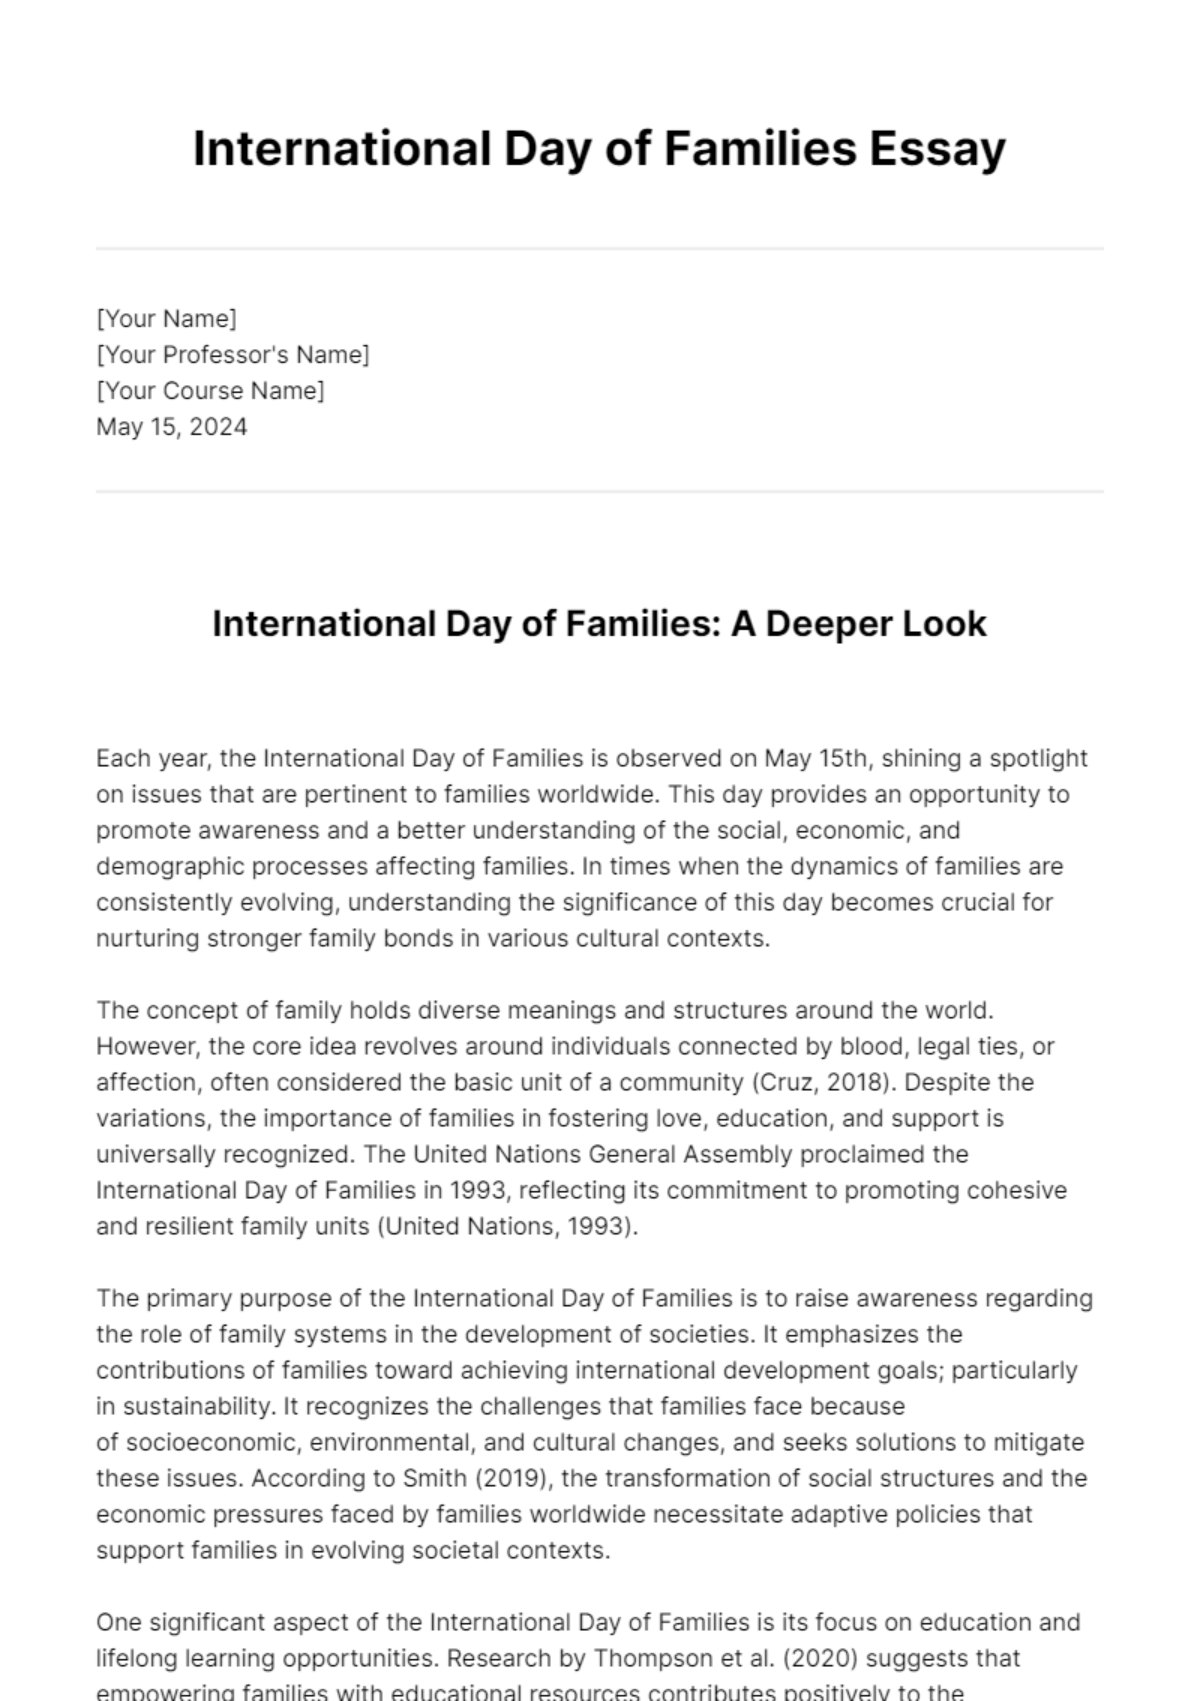 Free International Day of Families Essay Template